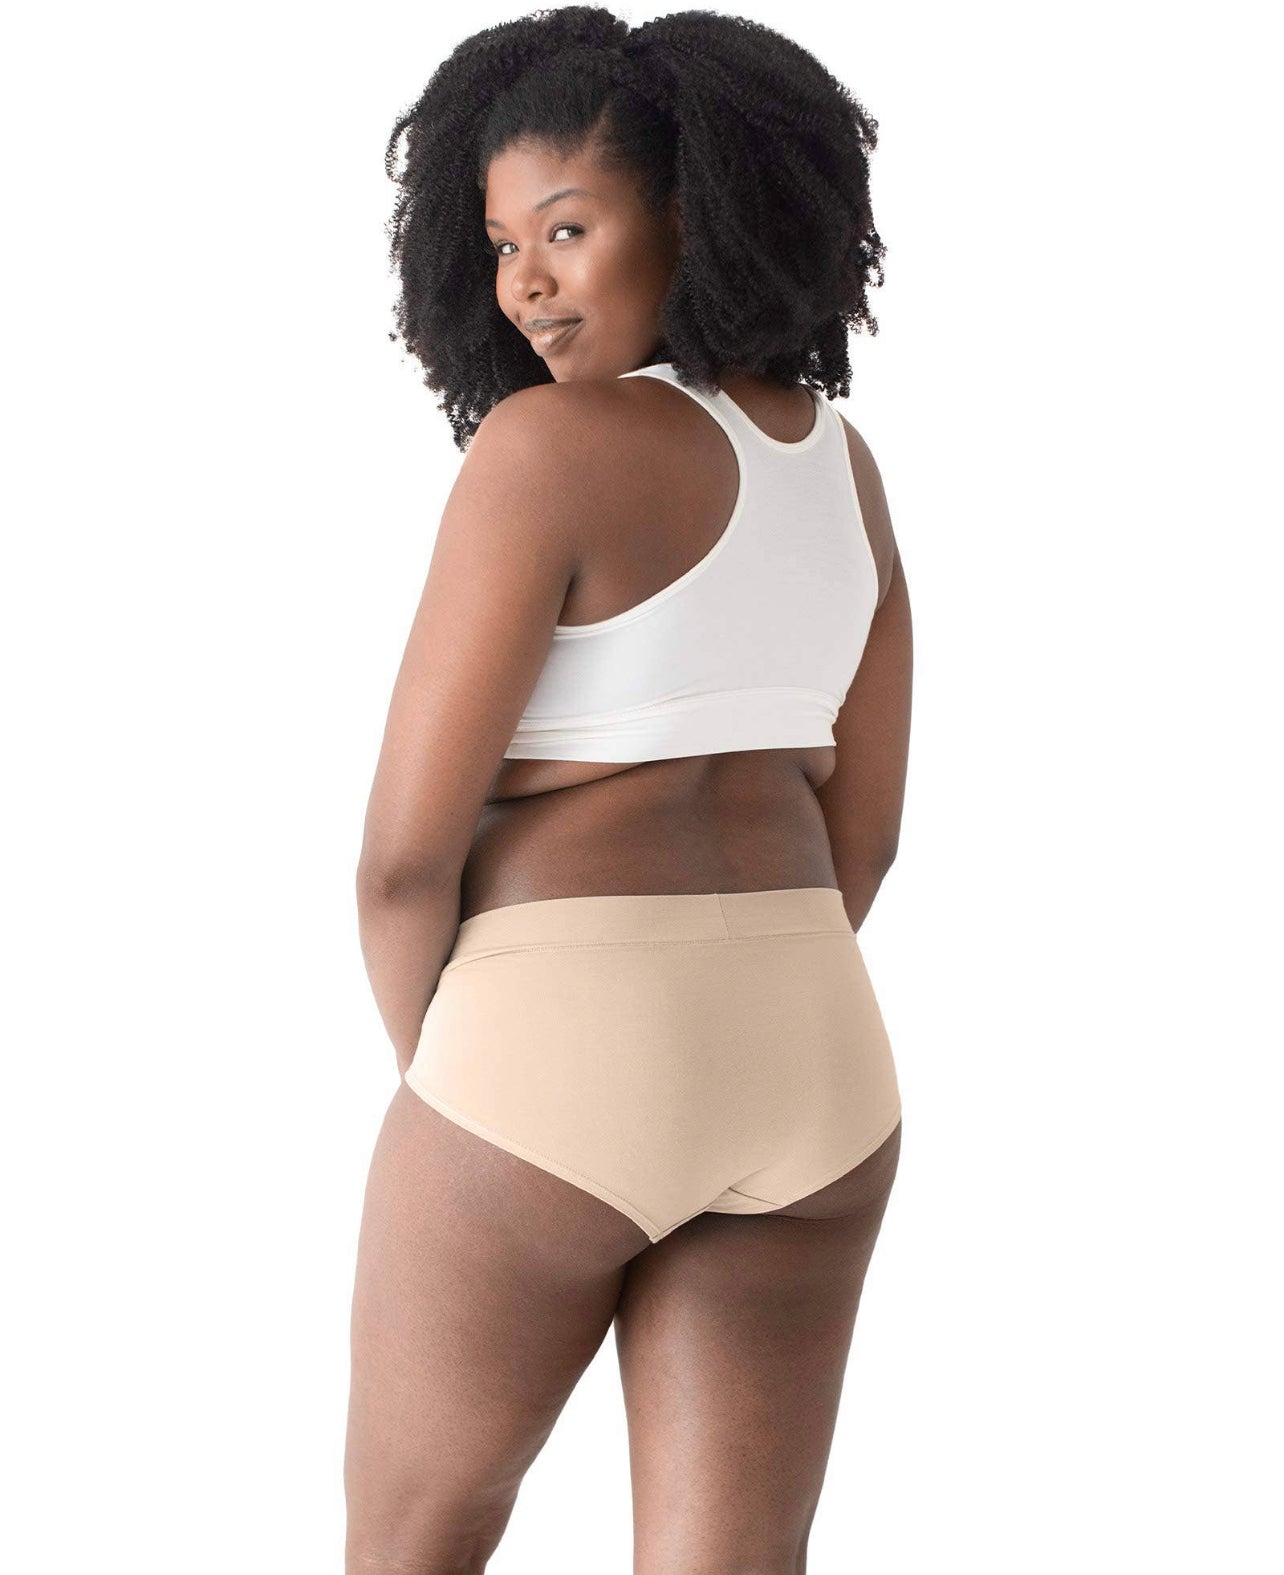 Bamboo Maternity Hipster Panties 2 Pack Maternity Underwear